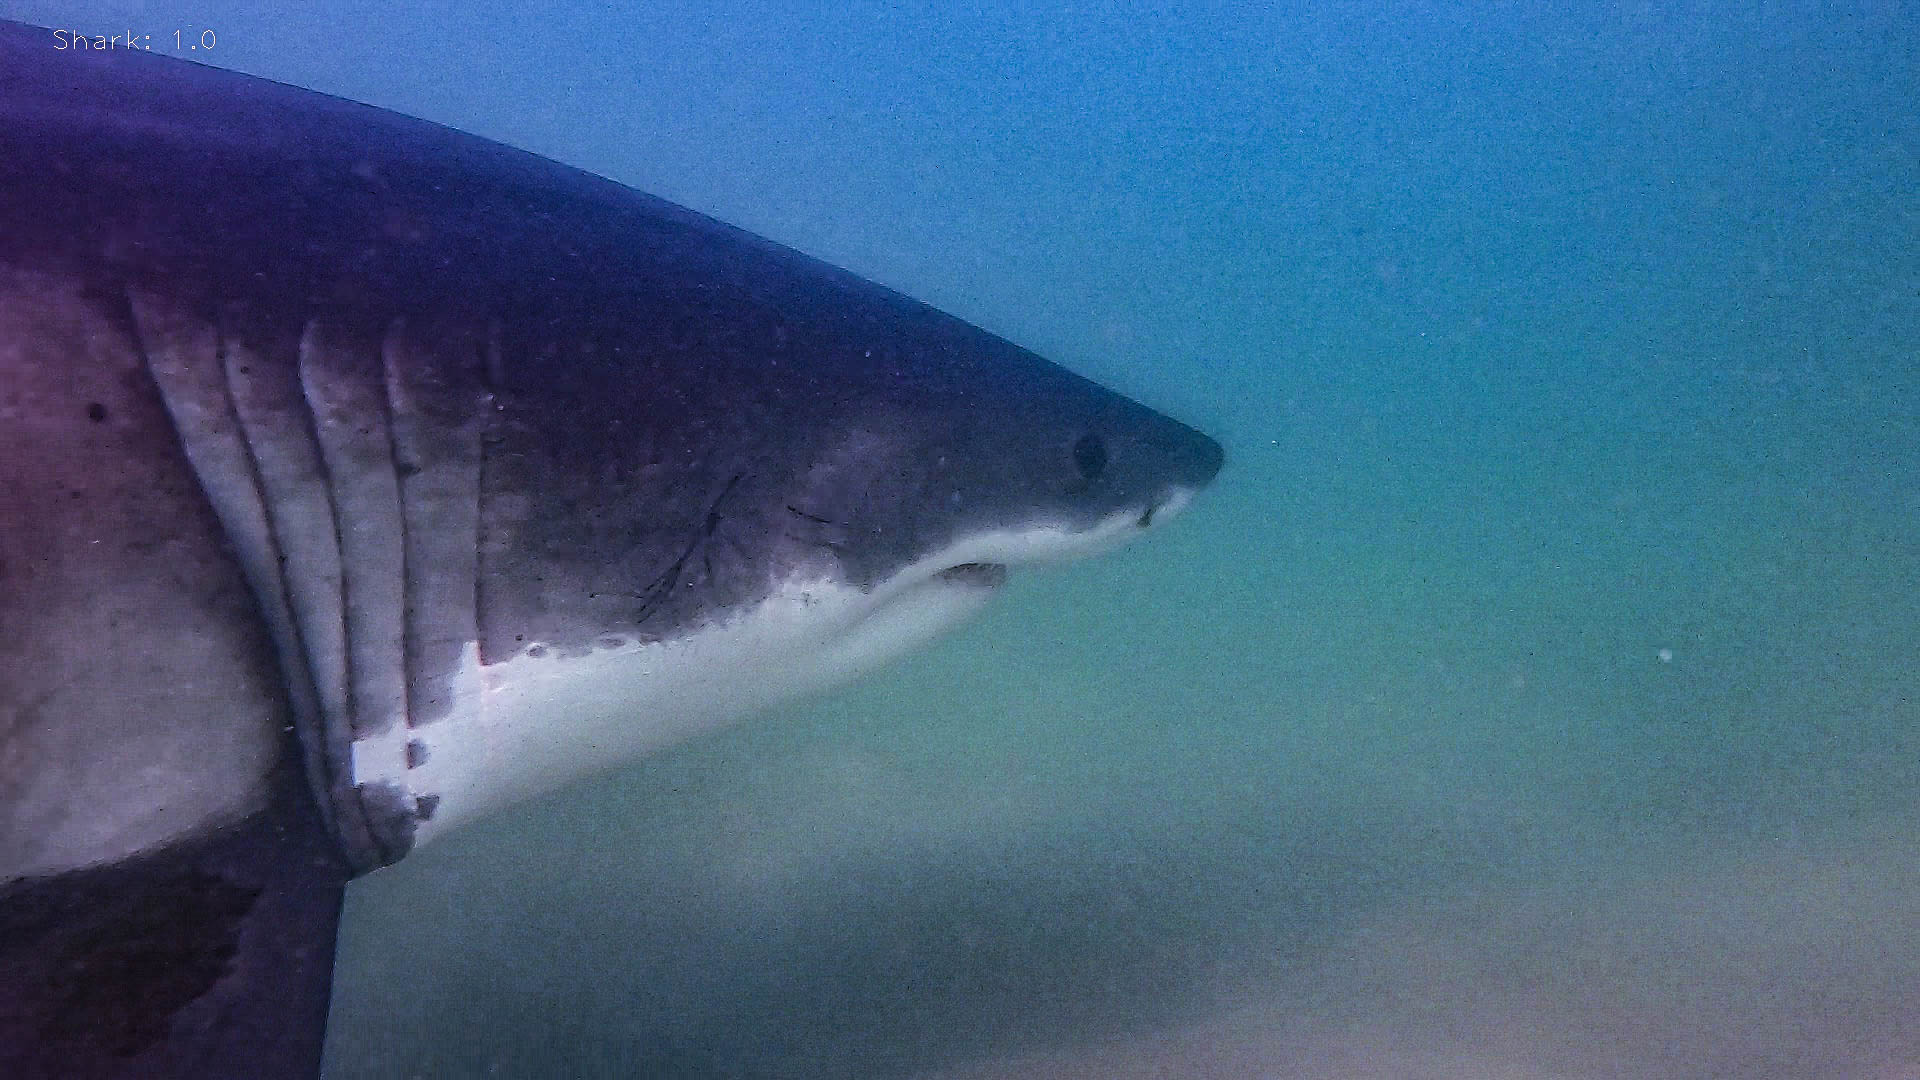 Bruin The Baby Great White Shark Spotted Near NYC